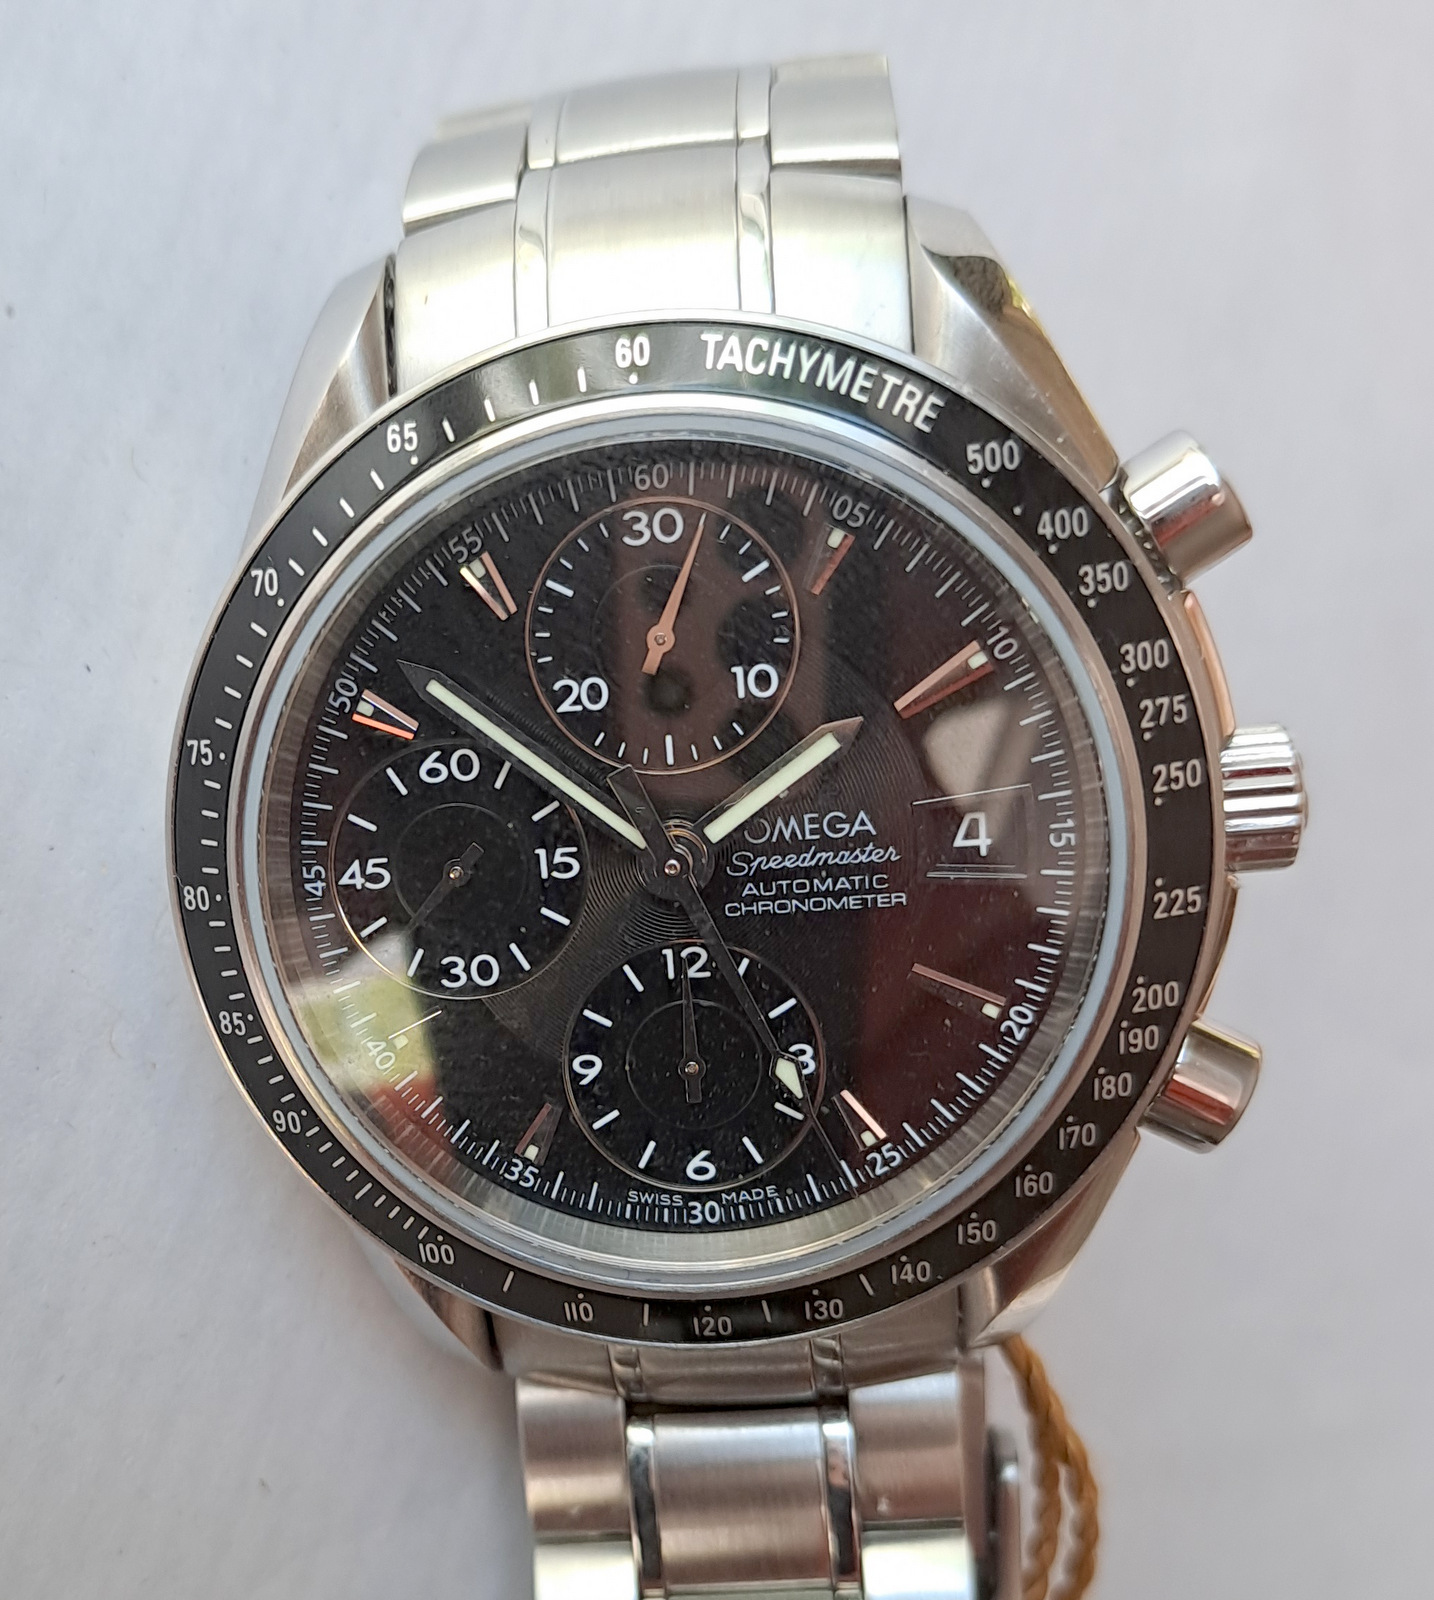 Omega Speedmaster Ref.3210.50.00 Chronometer Automatic Watch 40mm Wooden Case 2008 Model - Image 5 of 13